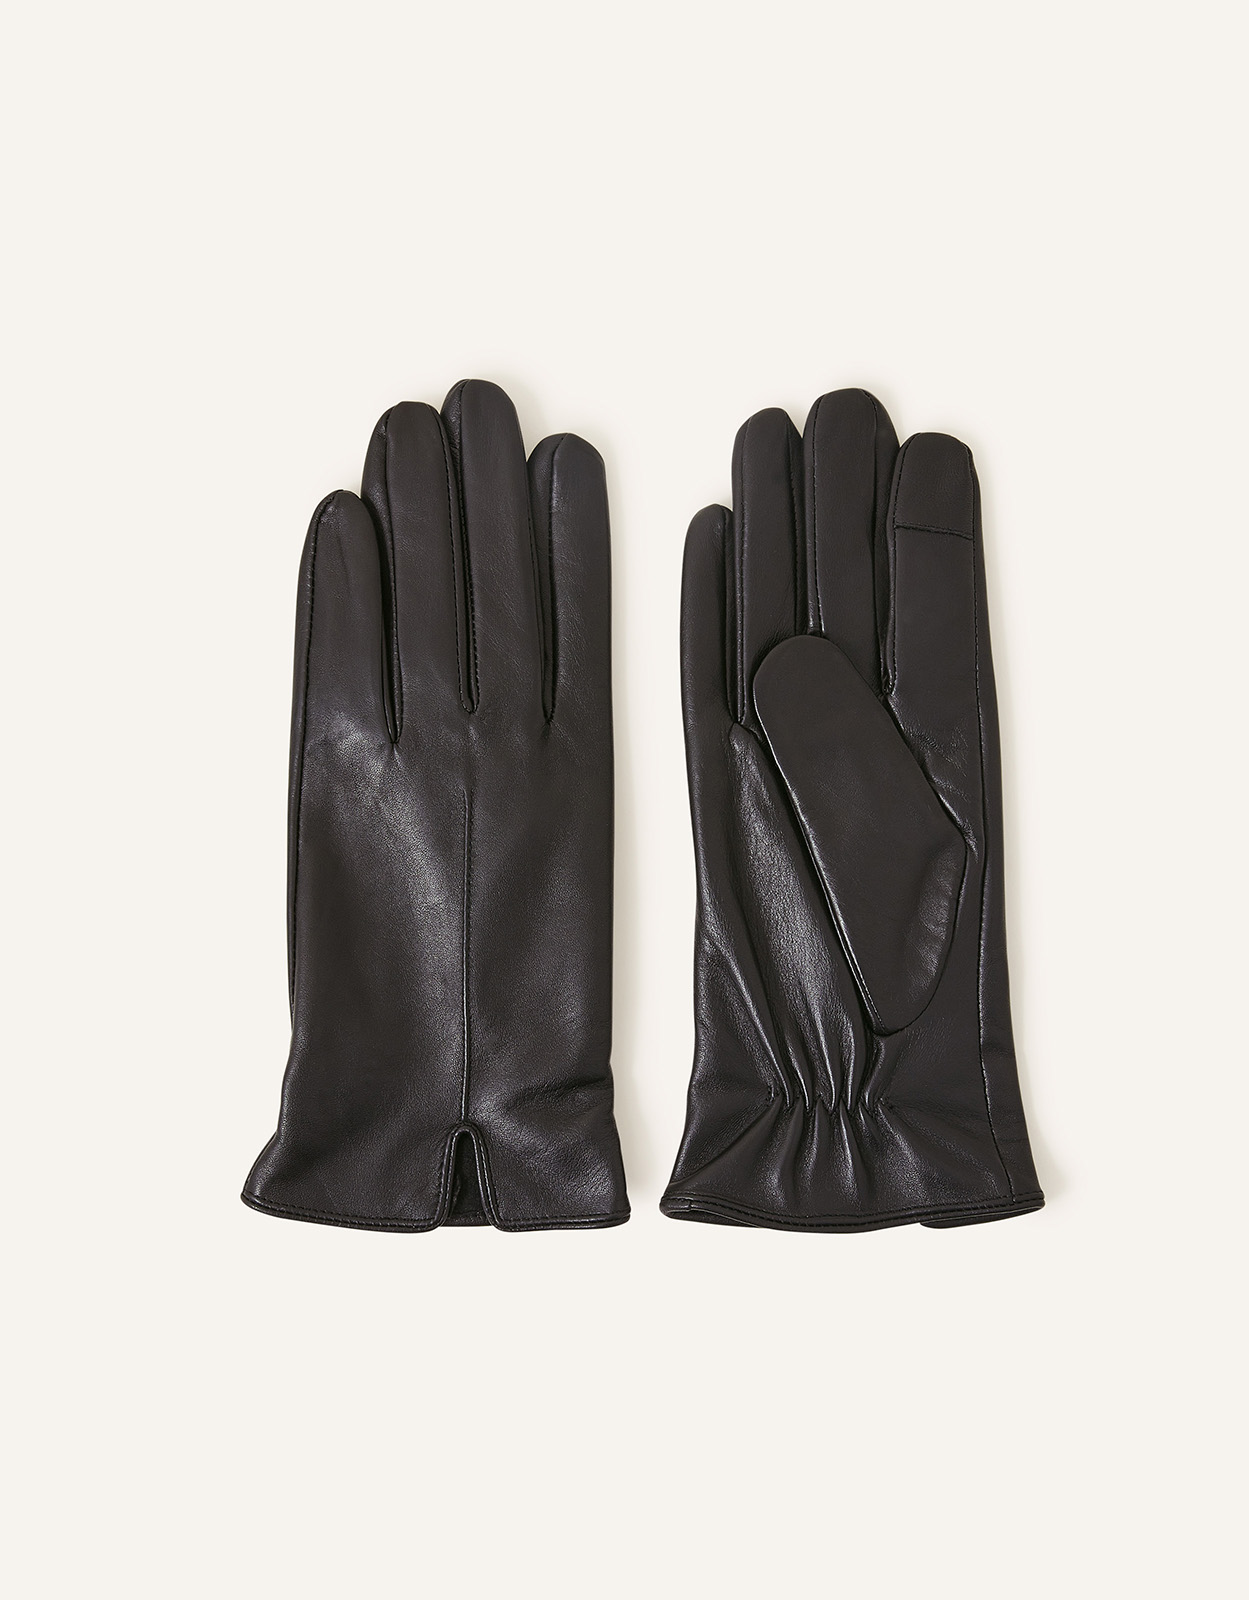 Accessorize Touchscreen Leather Gloves Black, Size: One Size